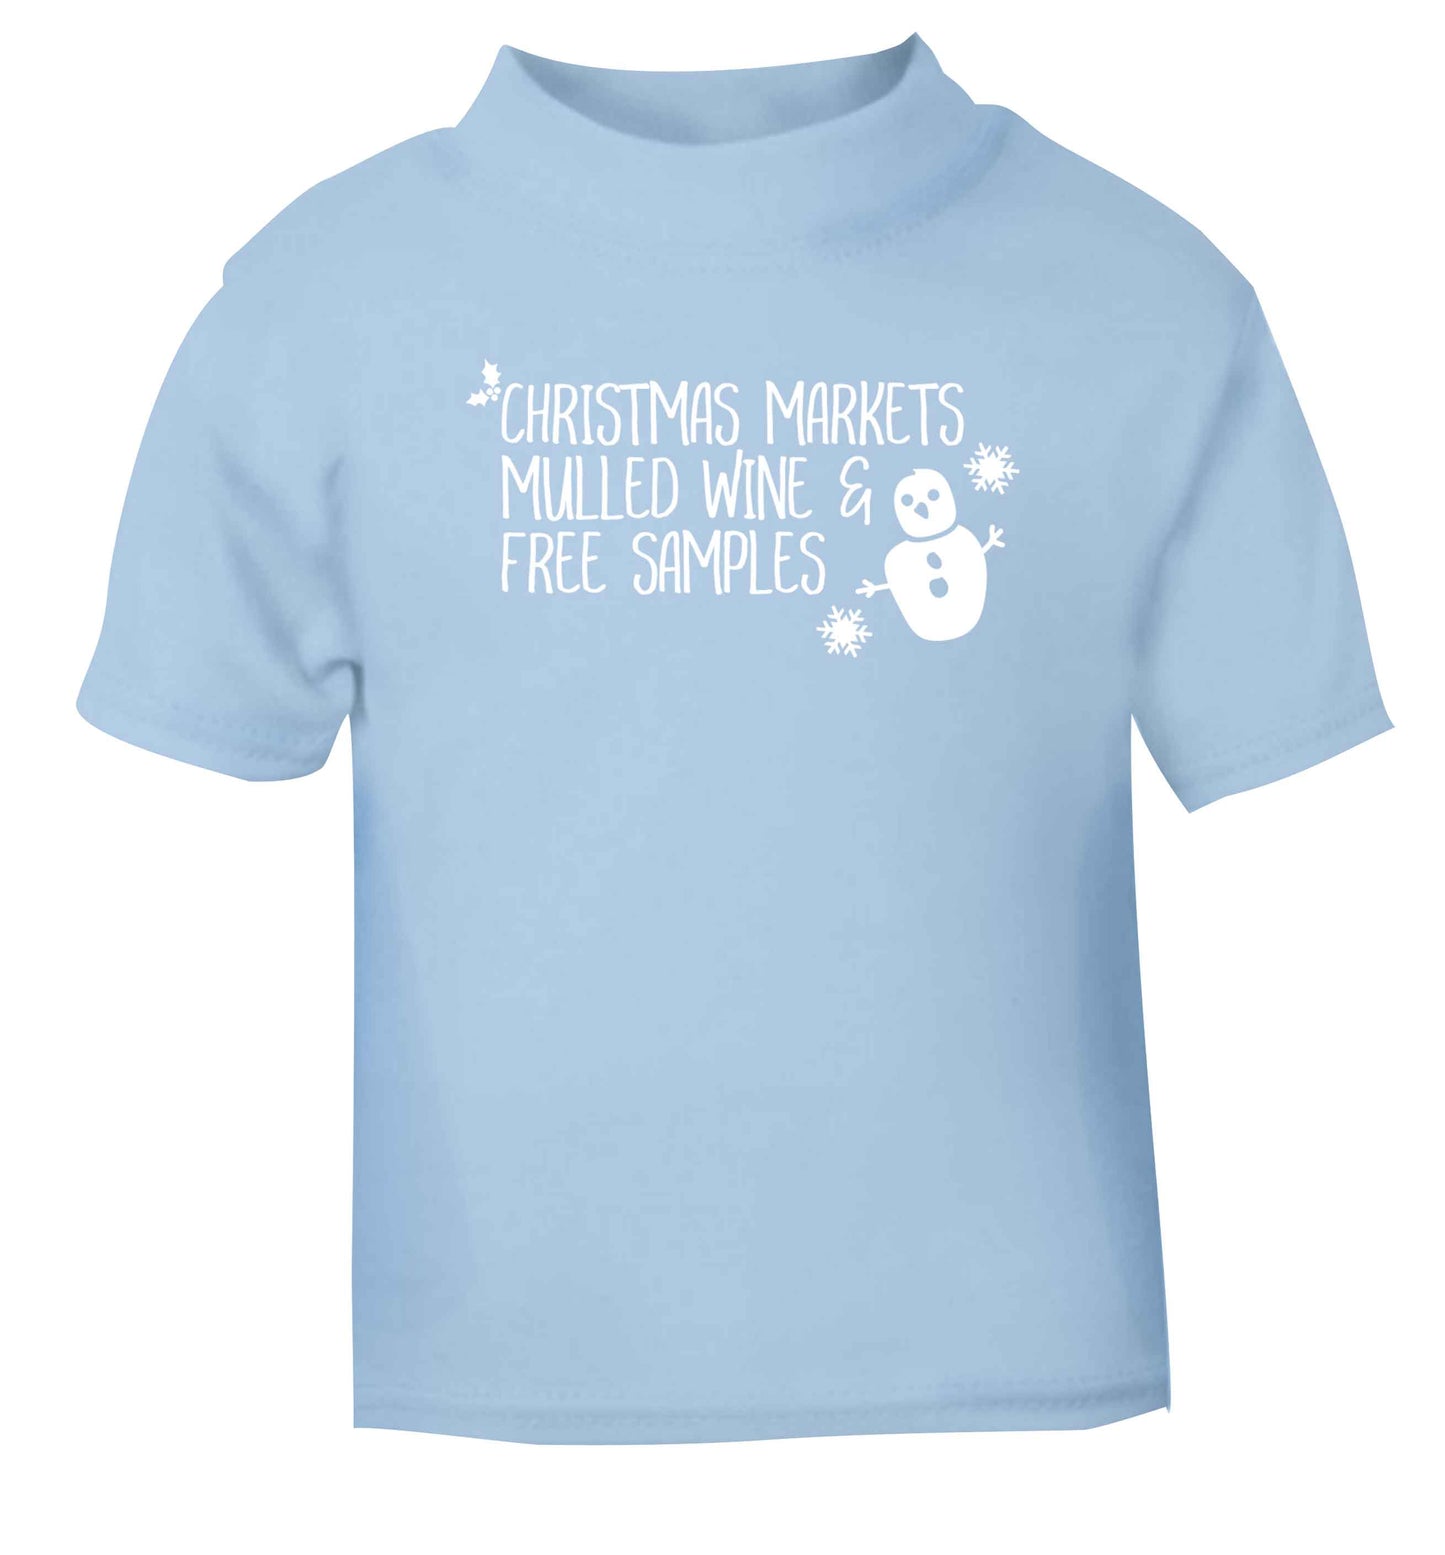 Christmas market mulled wine & free samples light blue Baby Toddler Tshirt 2 Years